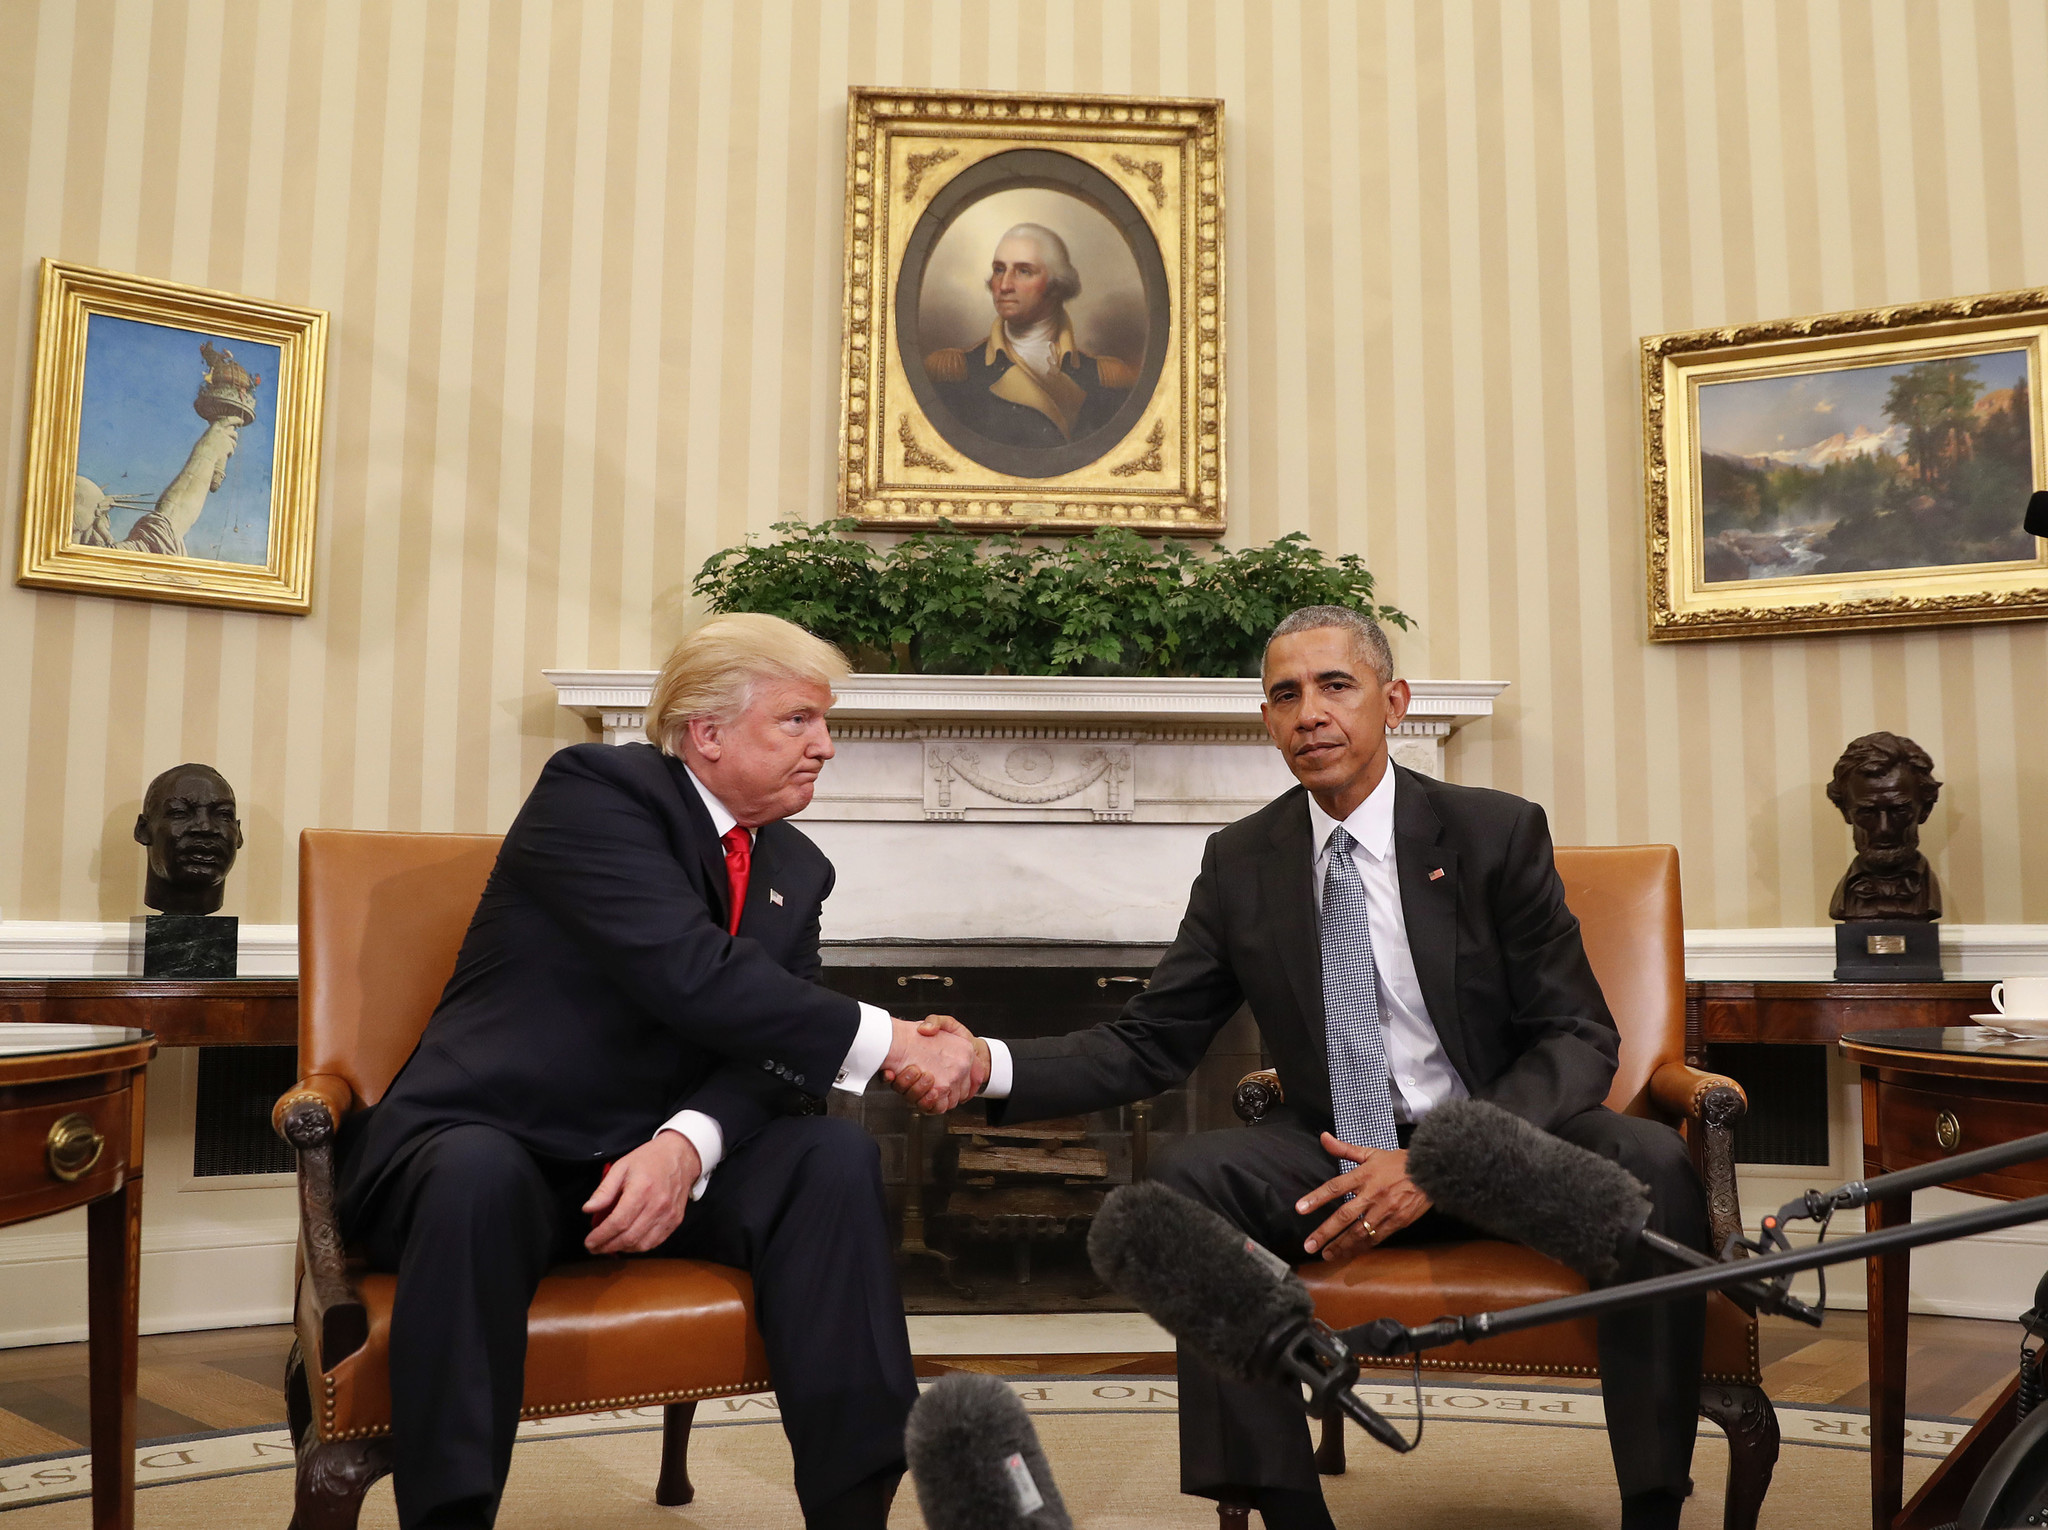 President Obama and then-President-elect Donald Trump shake hands following a meeting in the Oval Office in November.